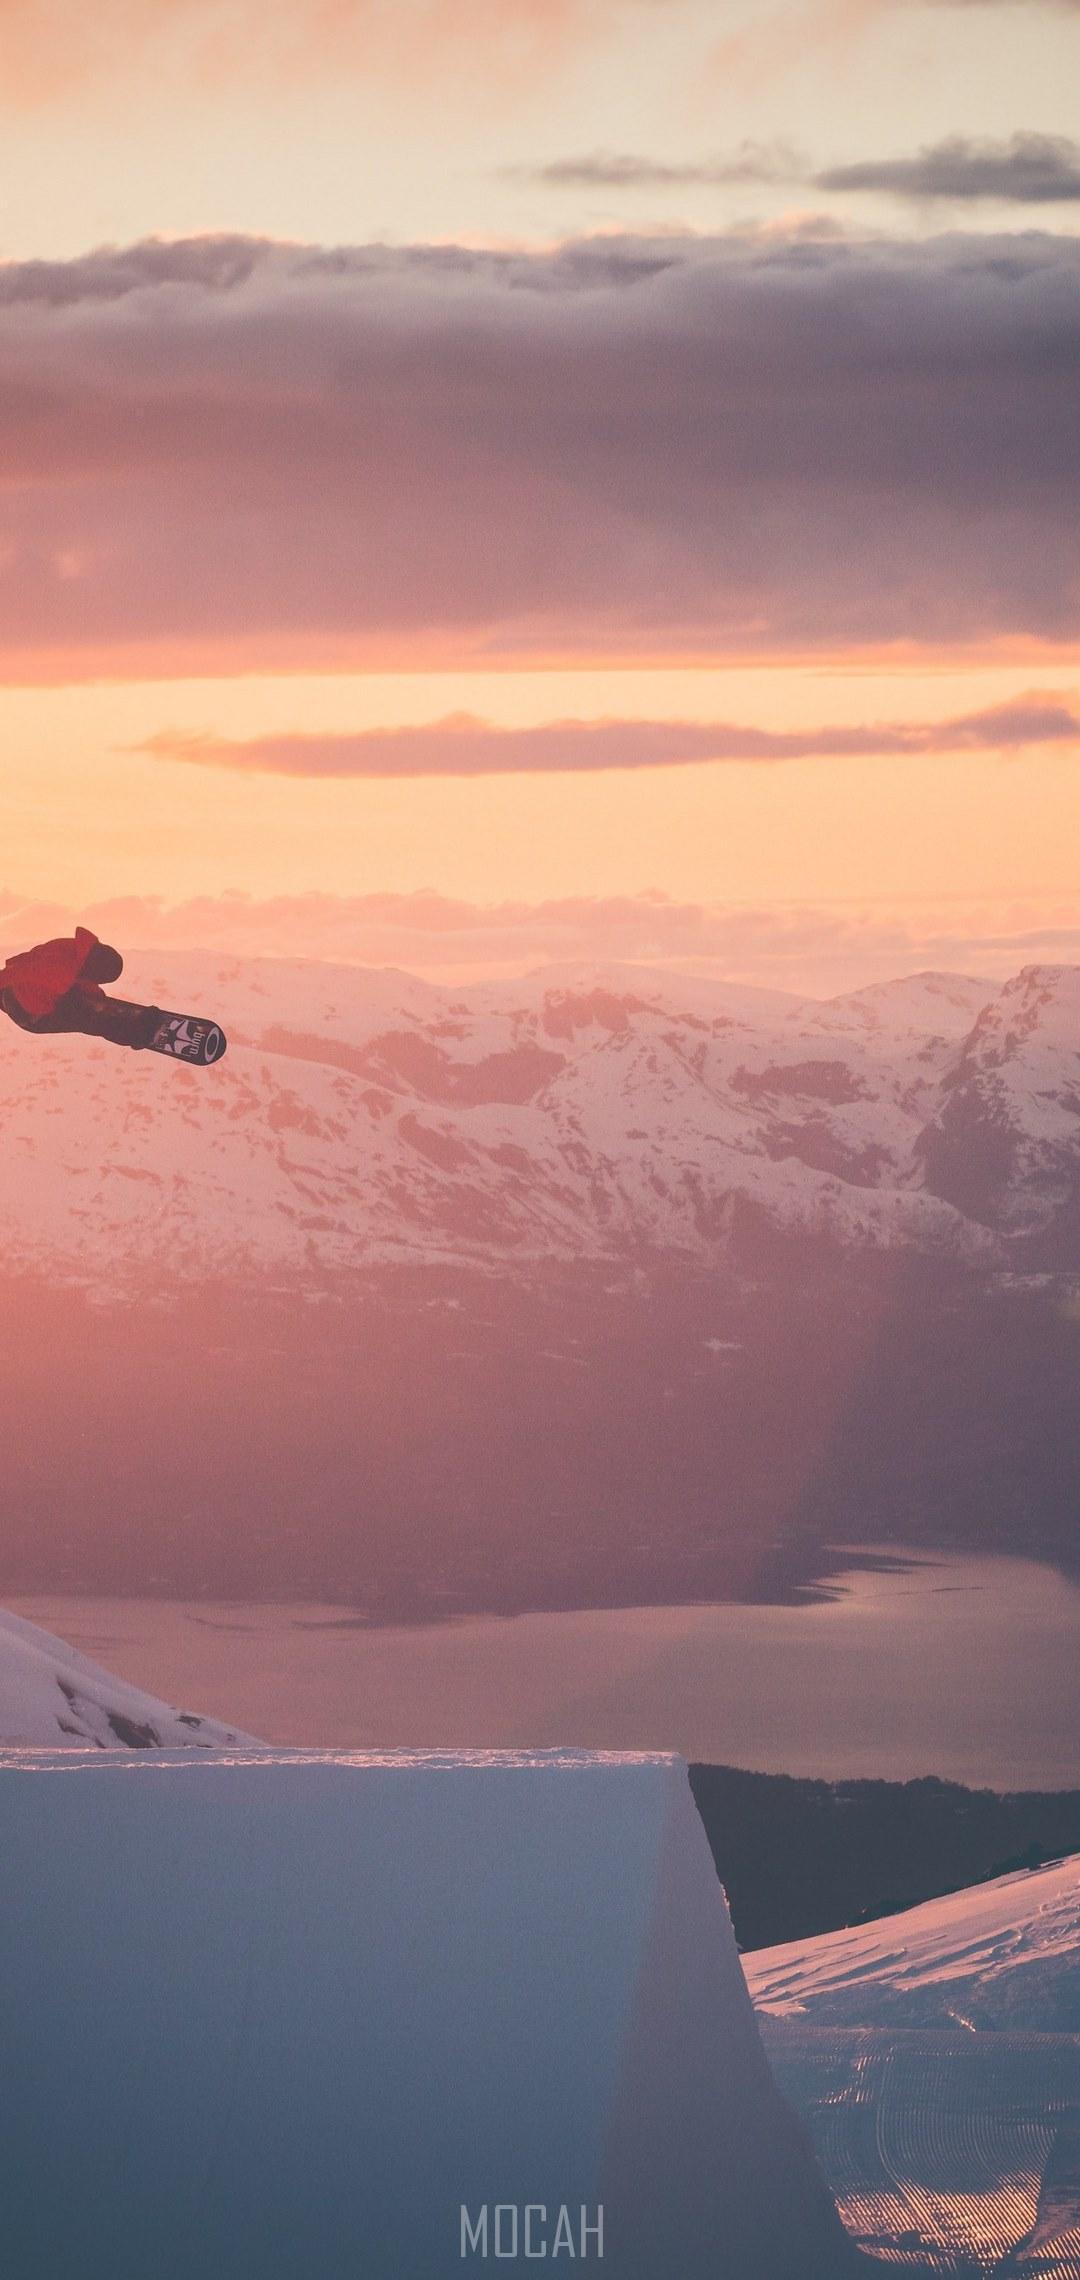 HD wallpaper, 1080X2280, A Snowboarder Is Airborne Surrounded By Golden Skies And Snowy Mountains, Snowboarder In Flight, Vivo V11I Screensaver Hd